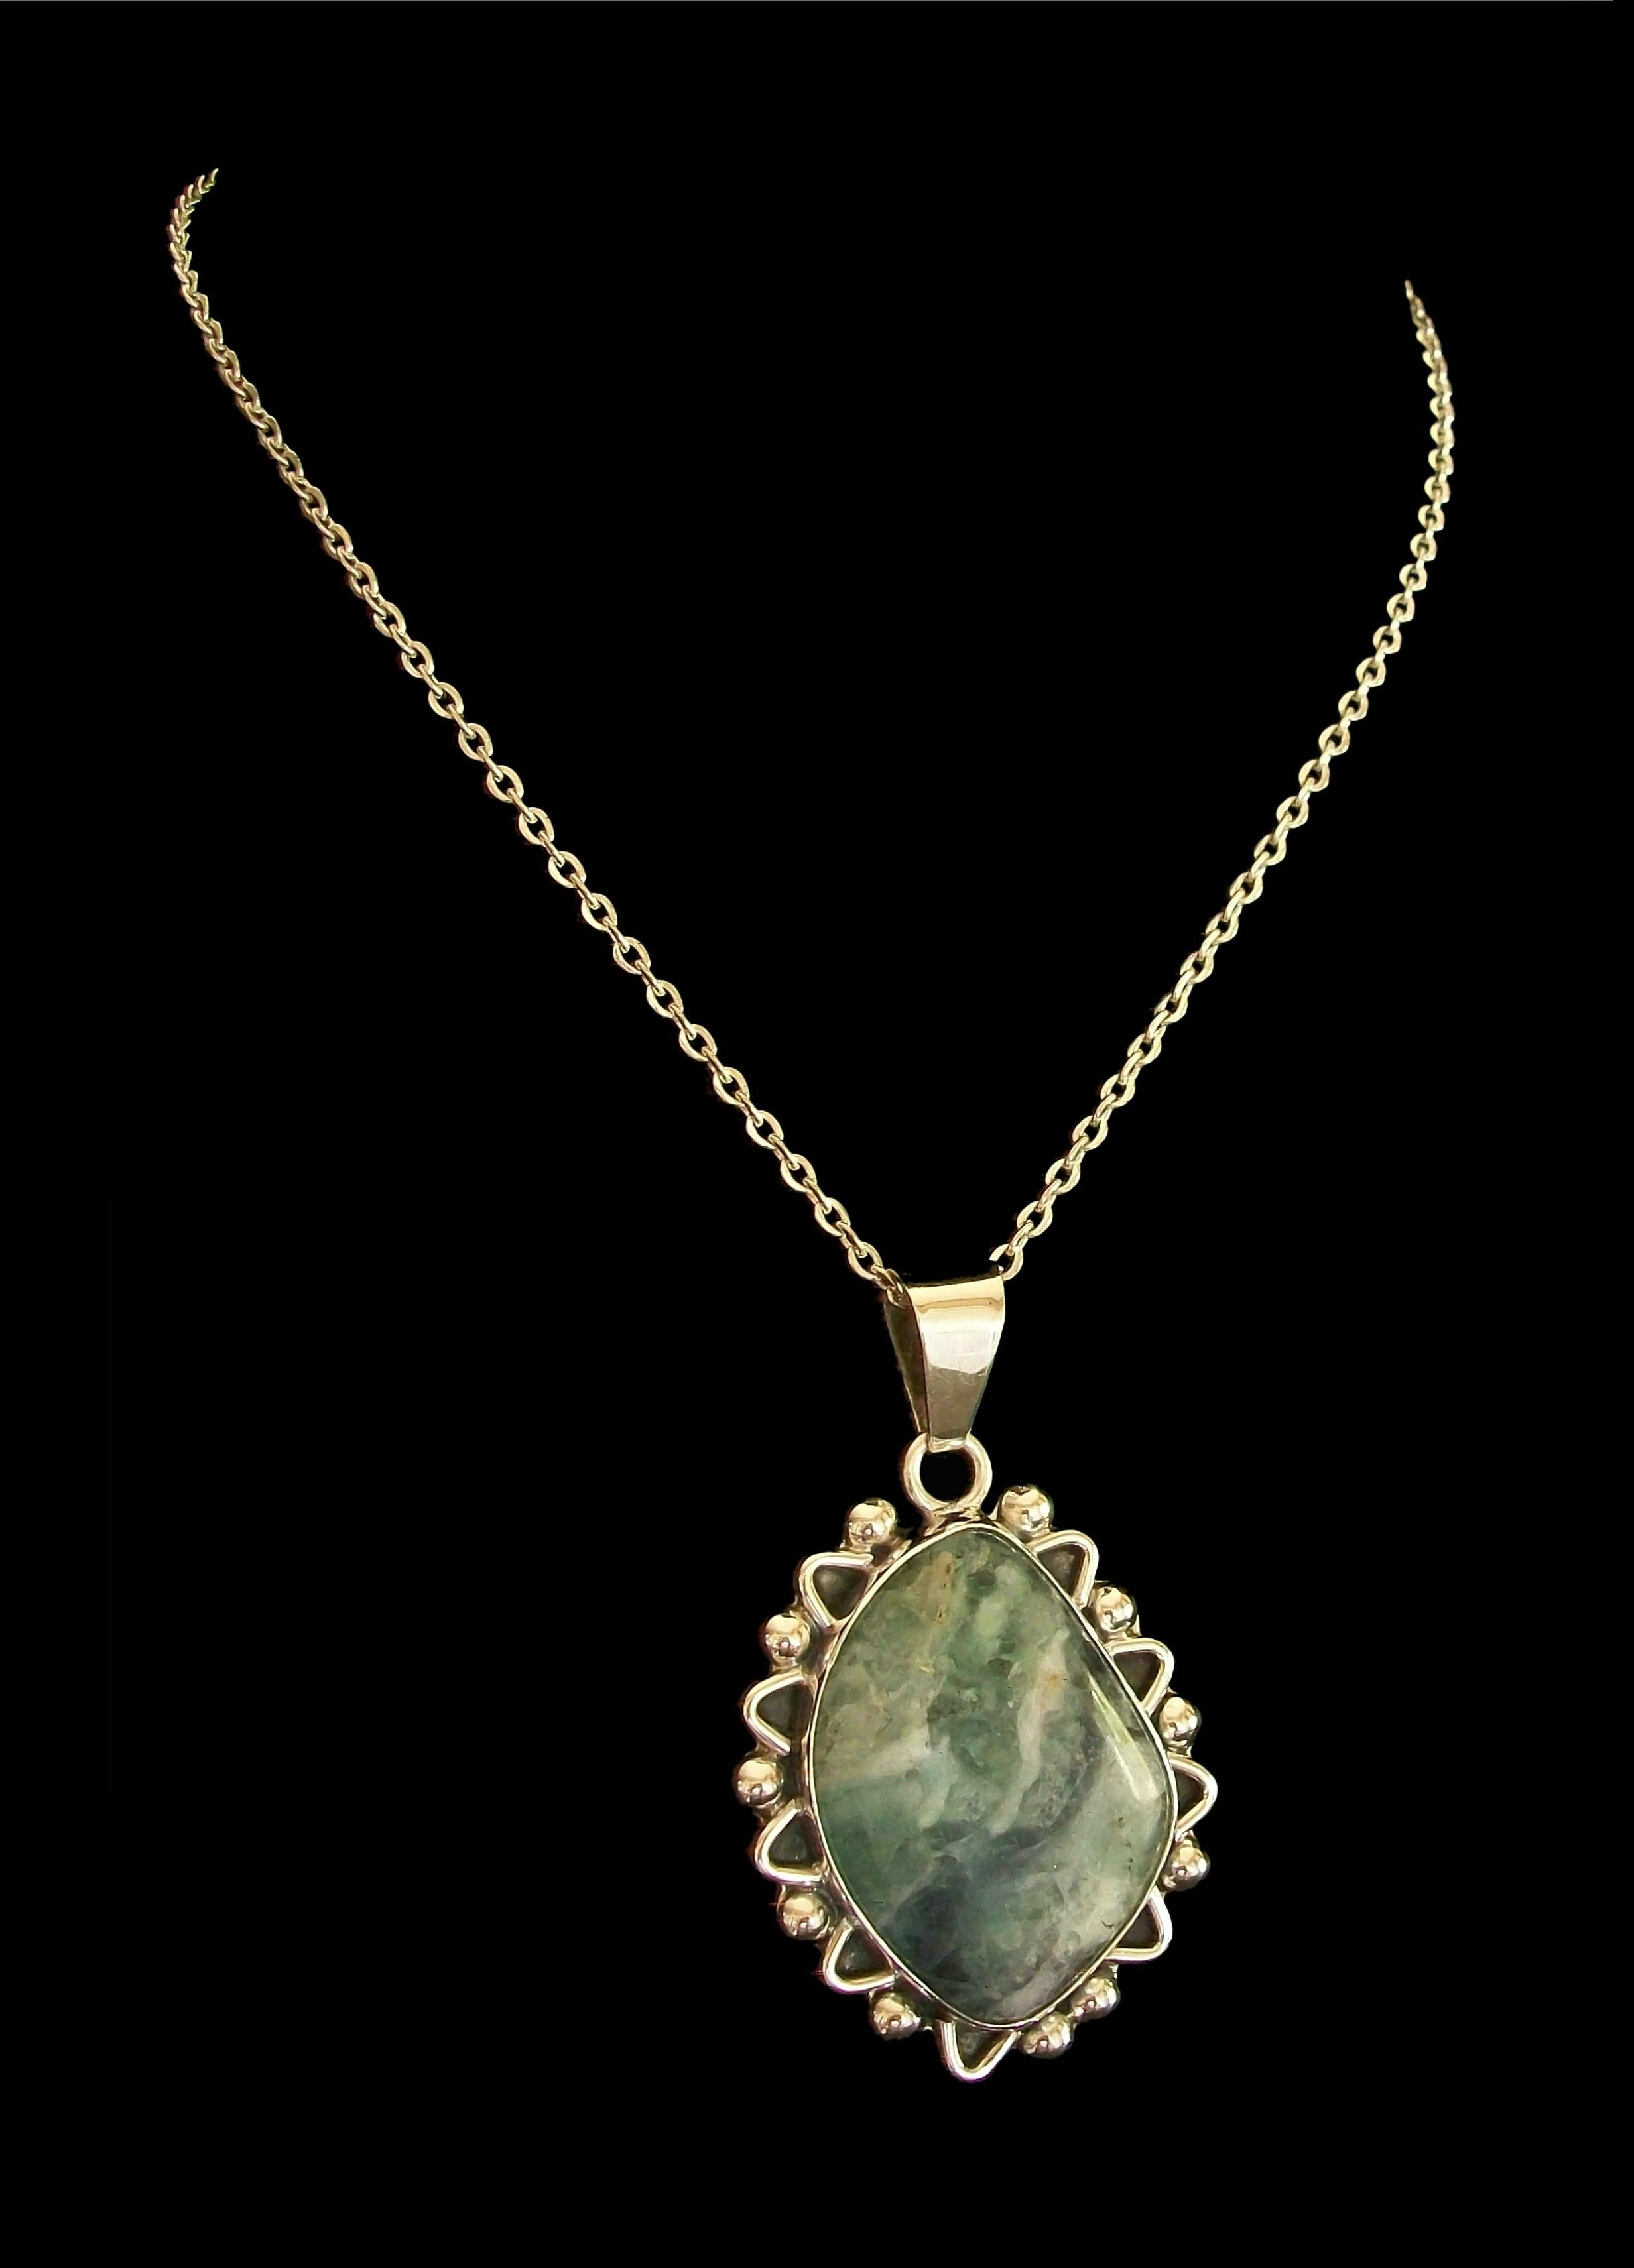 Vintage mottled green Jadeite and fine silver (950/1000) pendant and cable link necklace (unknown metal content) - featuring a large bezel set piece of polished Jadeite of irregular shape (approximately 1